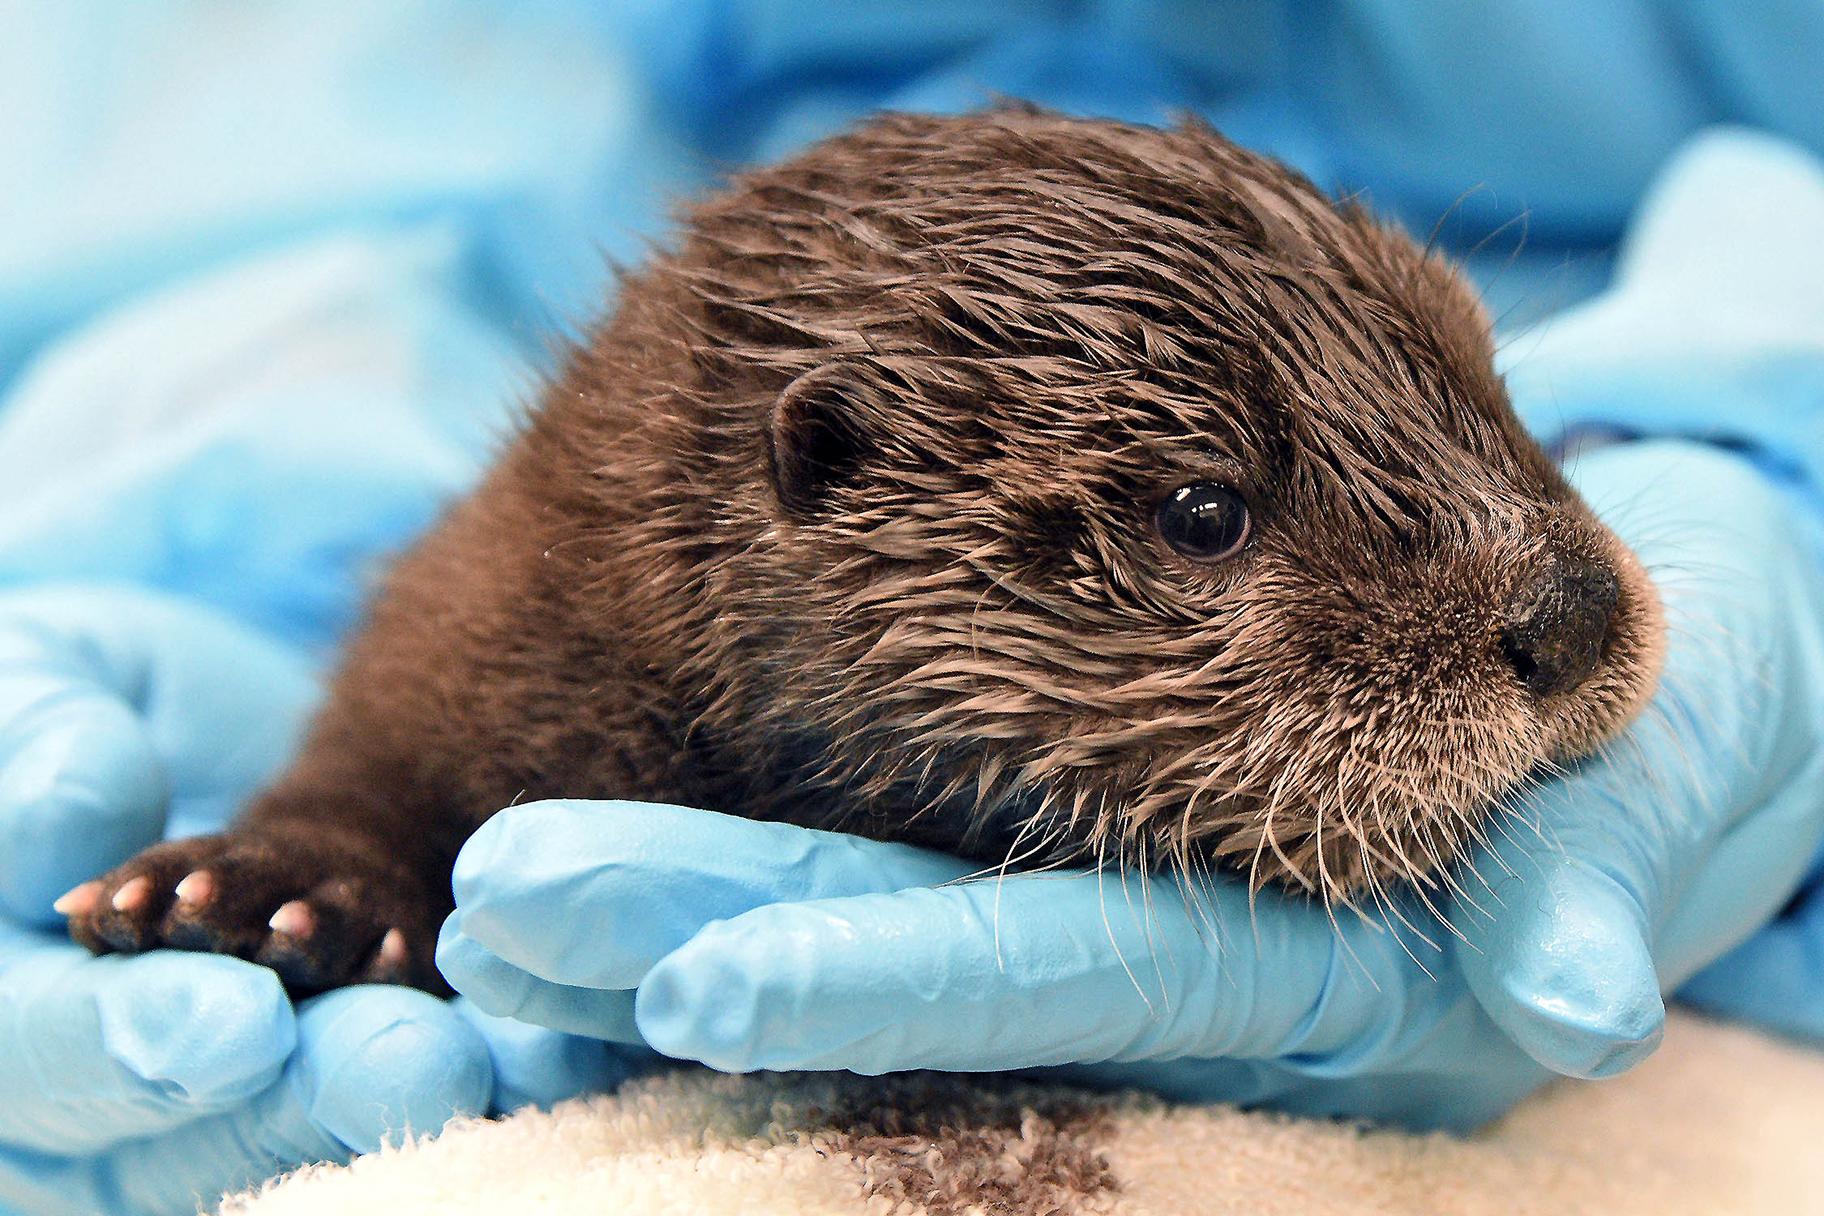 A North American river otter born in February at Brookfield Zoo will be relocated to a zoo with otters of a similar age. (Jim Schulz / Chicago Zoological Society)